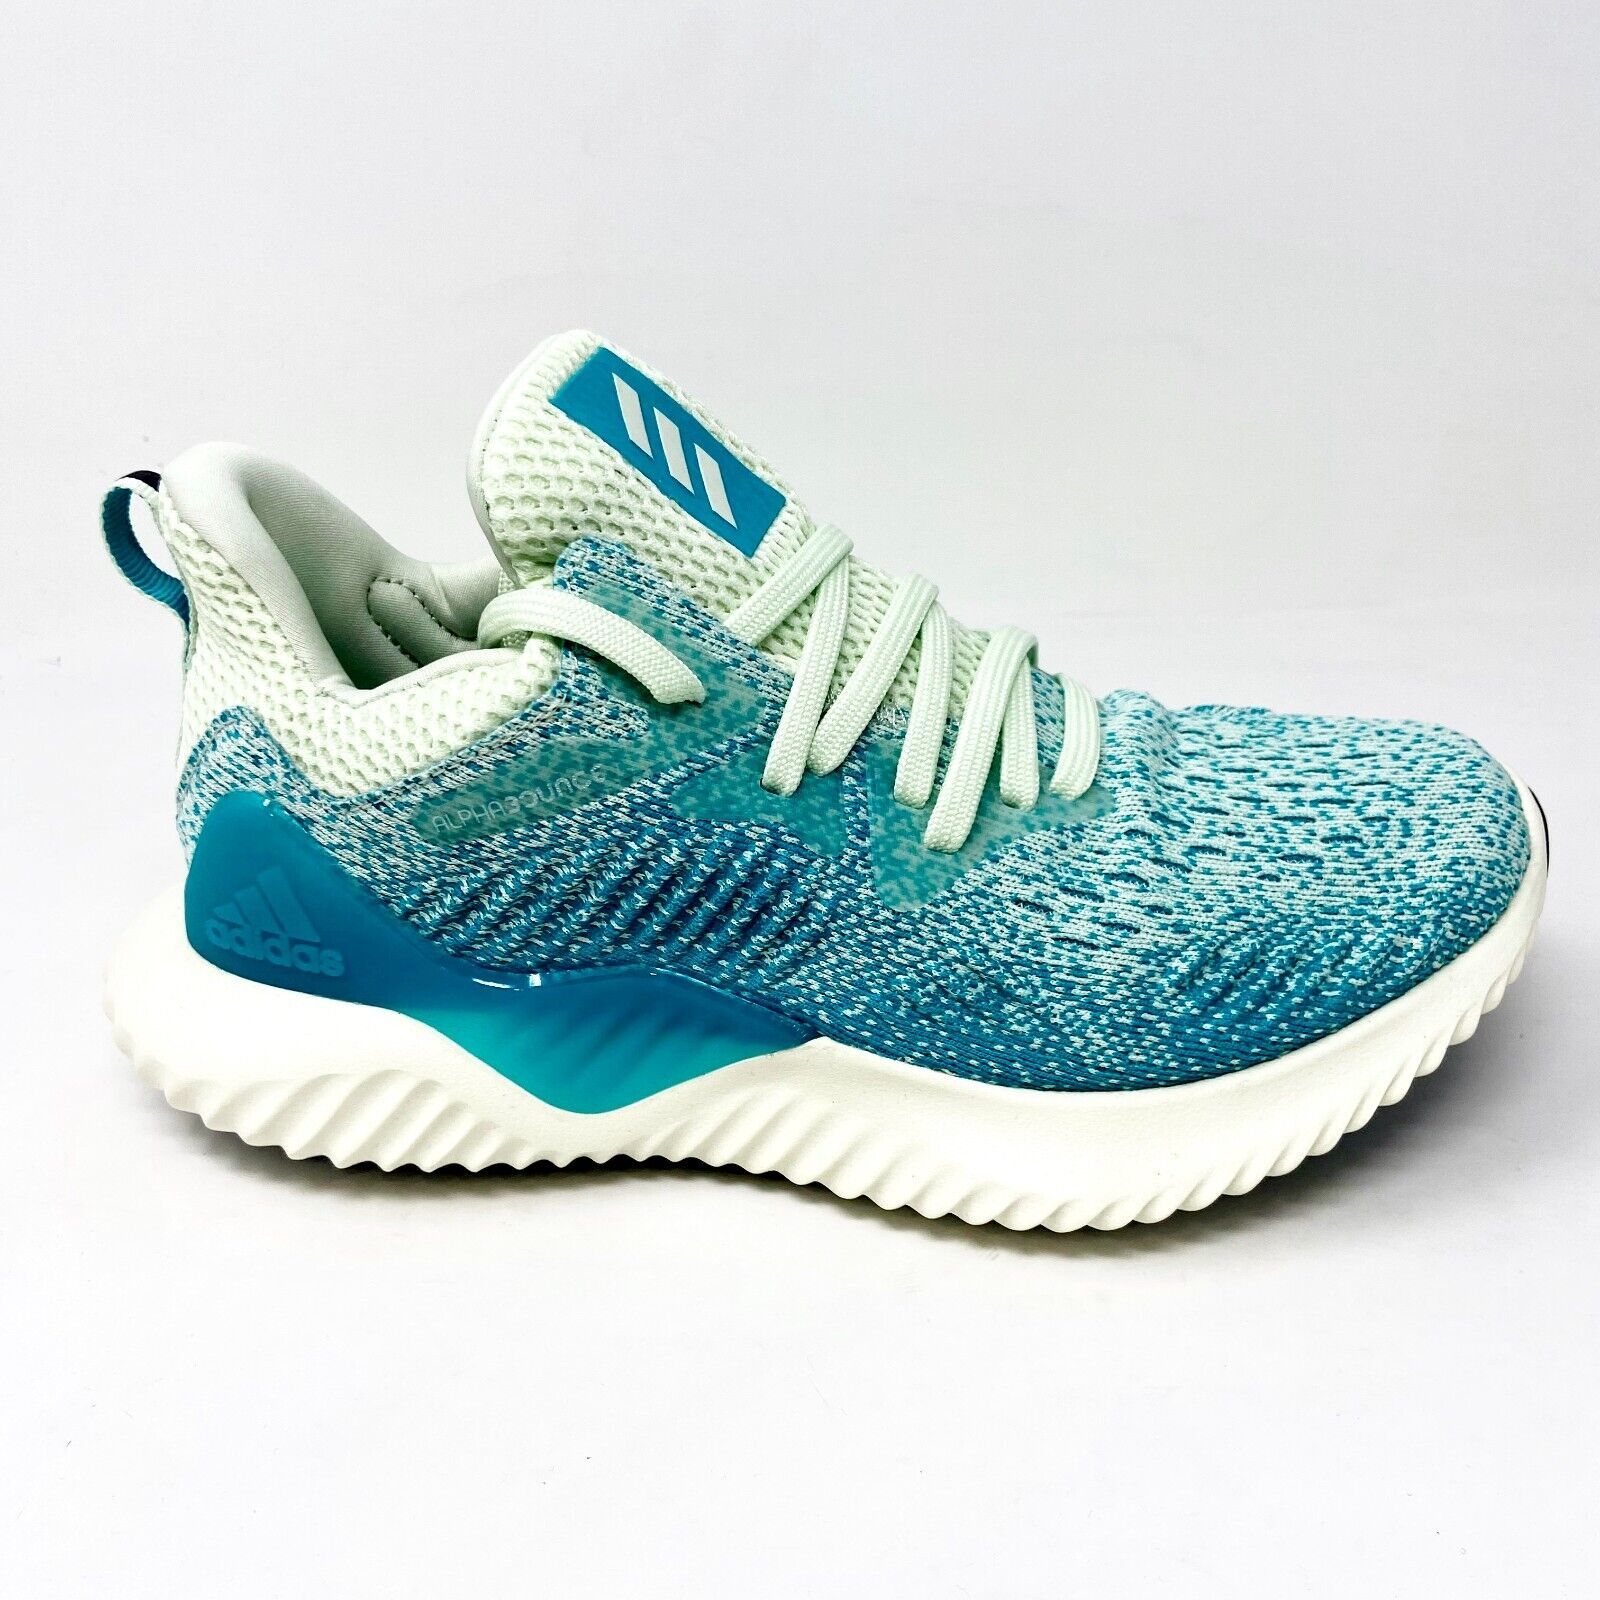 Primary image for Adidas AlphaBounce Beyond Teal White Womens Size 5.5 Running Shoes CG5578